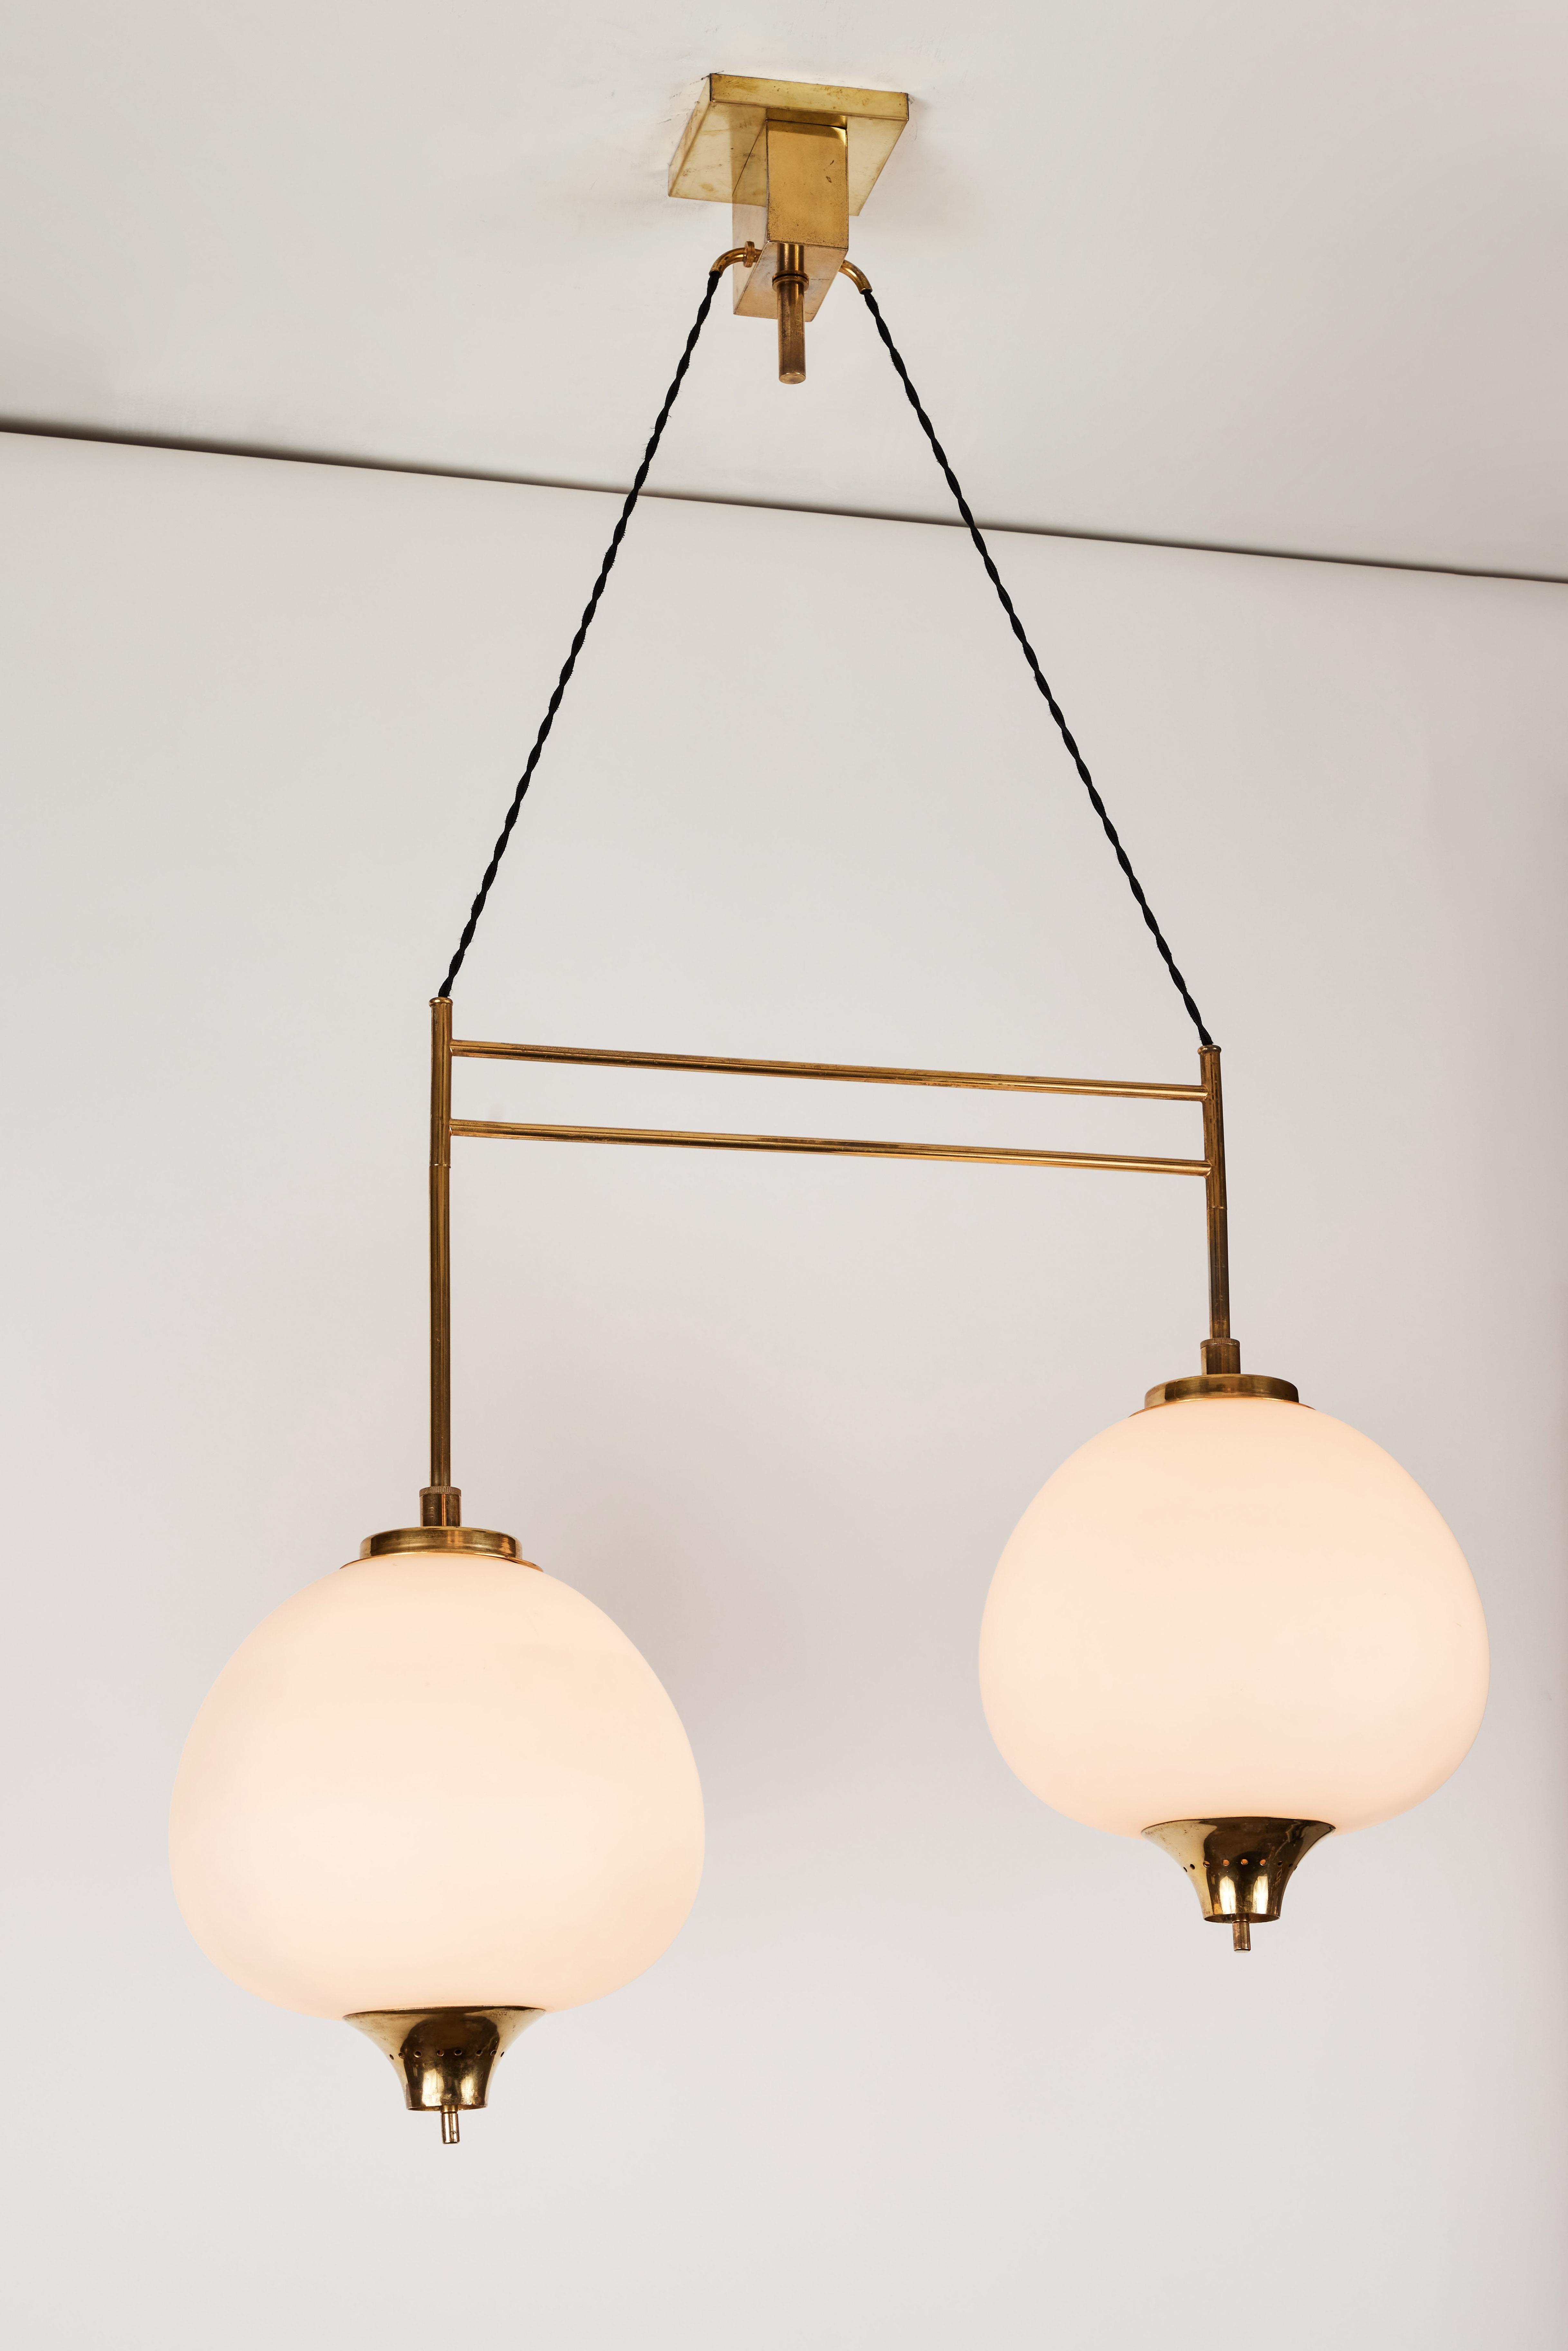 1950s Bruno Chiarini double pendant suspension lamp for Stilnovo. A quintessentially 1950s Italian design executed in two cascading matte finish opaline glass pendants with sculptural brass hardware and the original architectural ceiling canopy